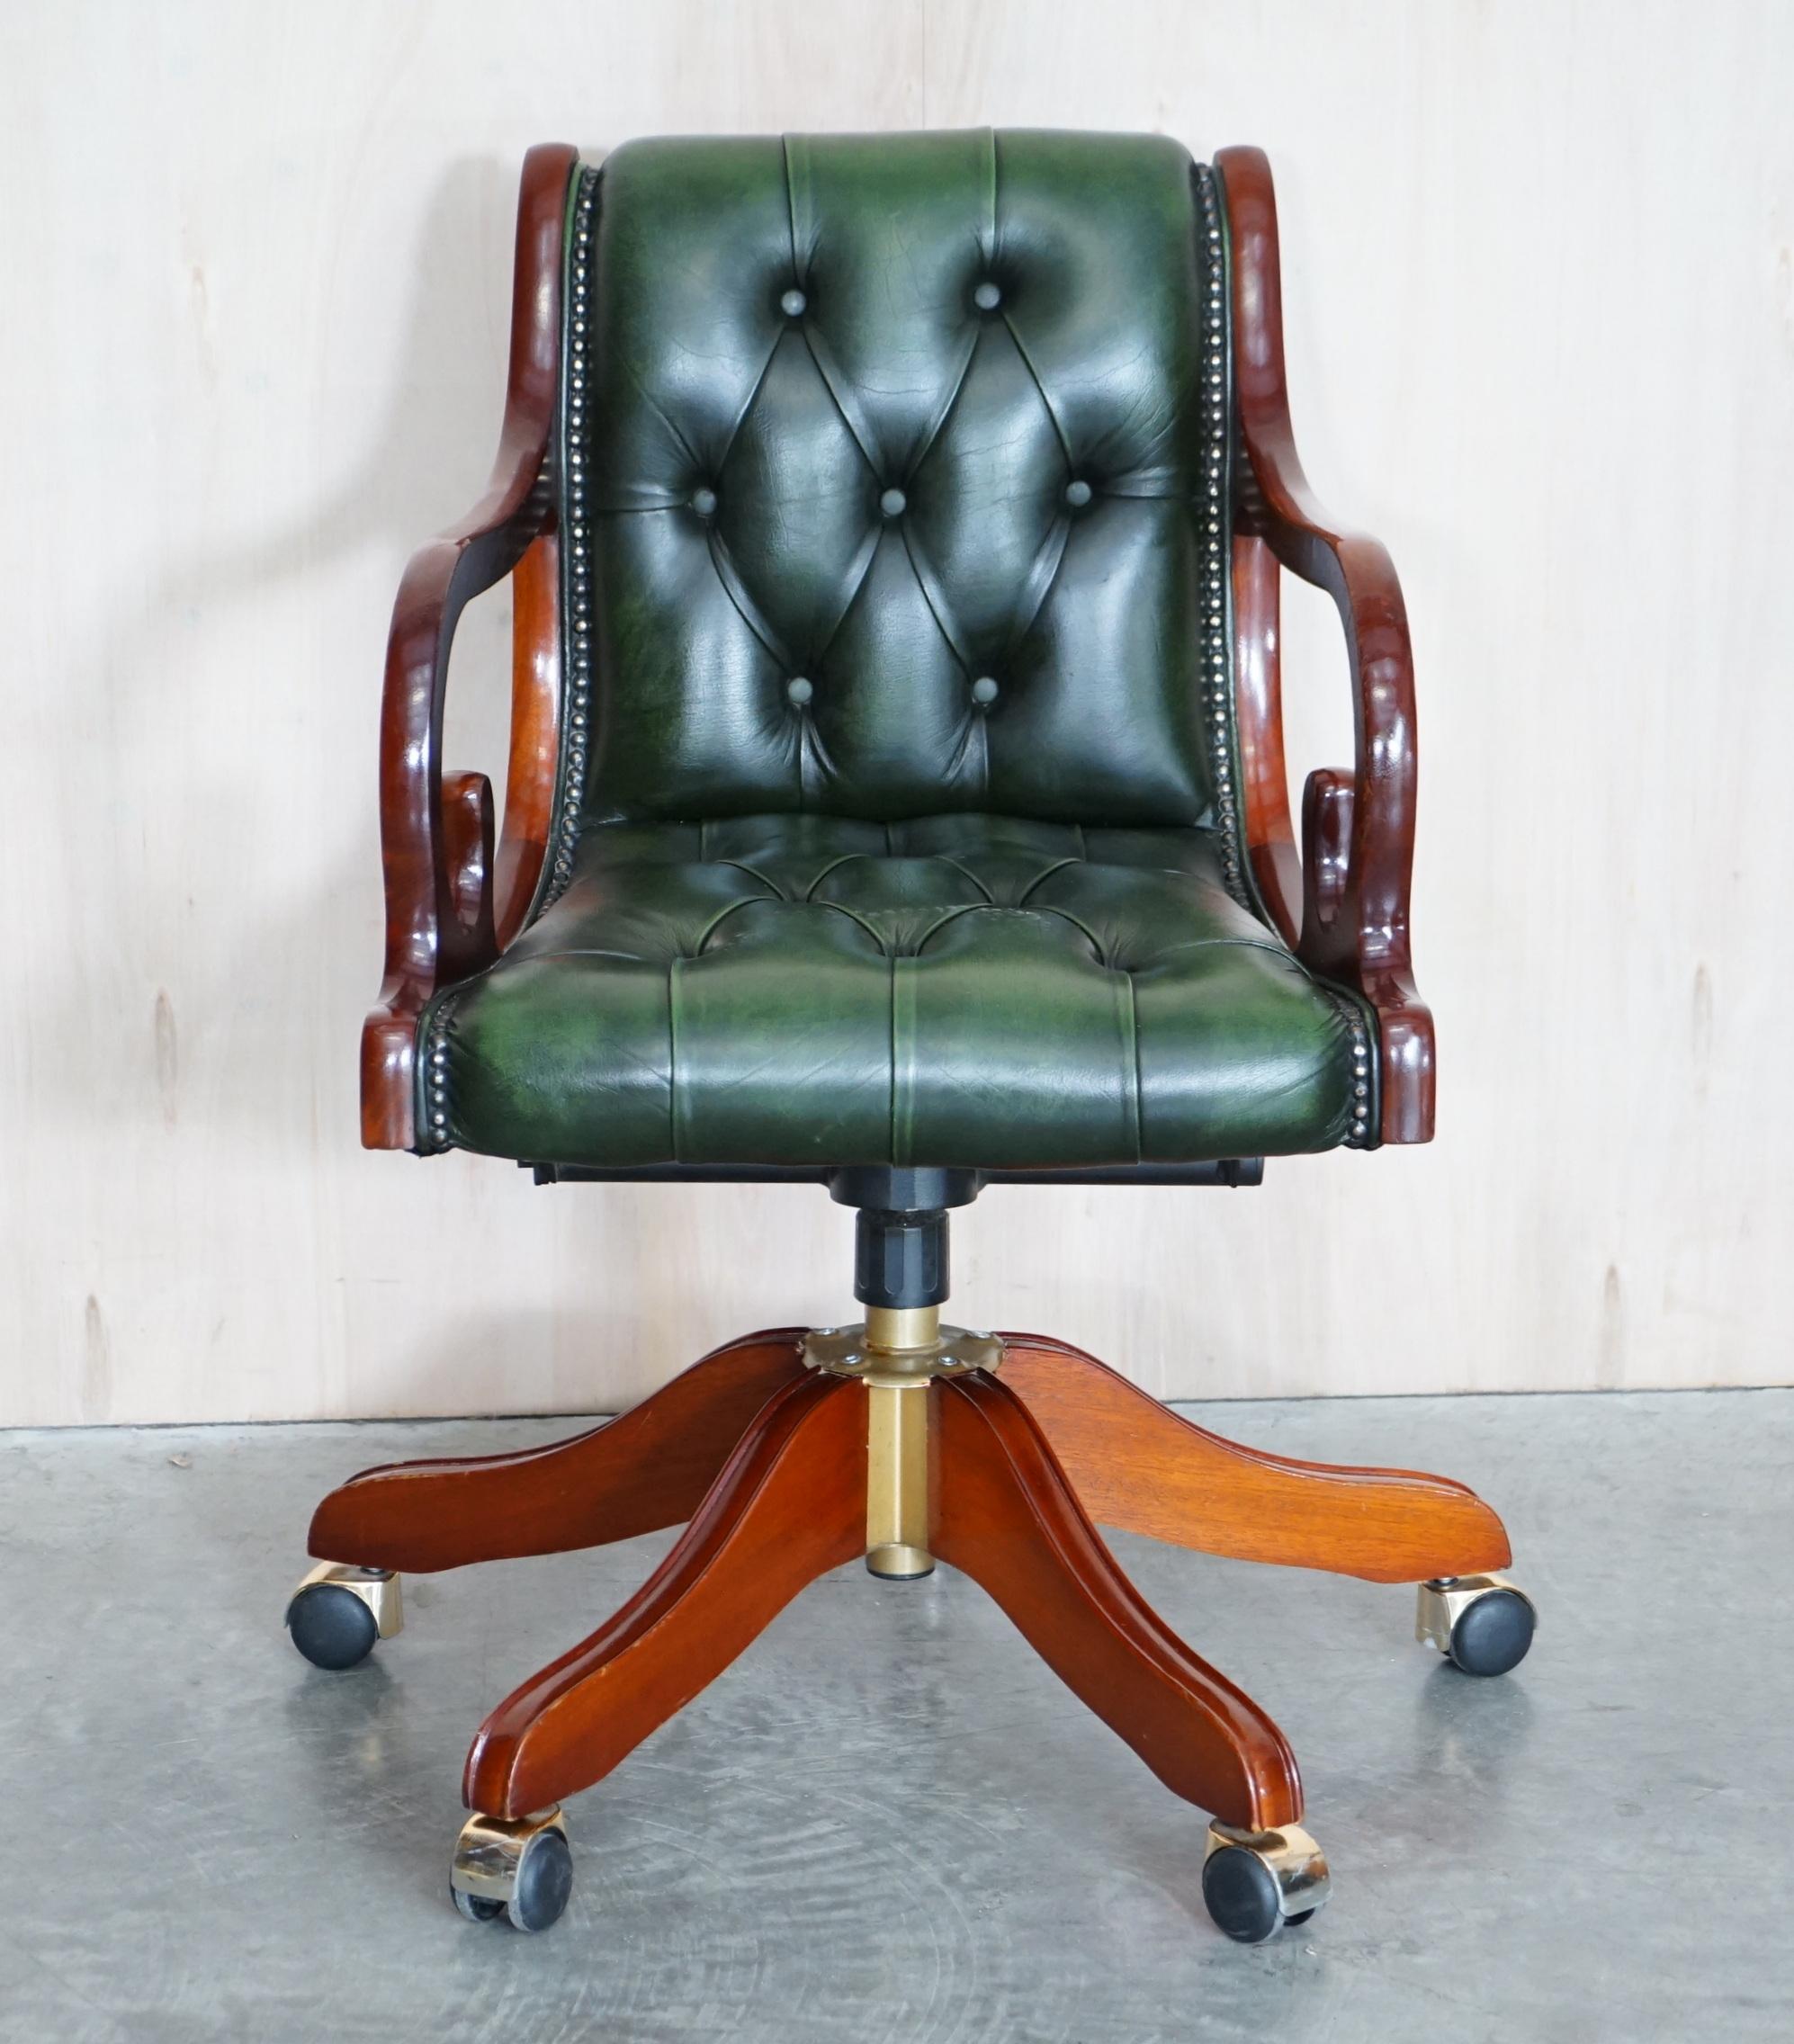 We are delighted to offer for sale this lovely, specially designed, handmade chesterfield buttoned green leather captains or directors armchair.

A good looking well-made and decorative captain’s chair, it has a light beech wood frame with a